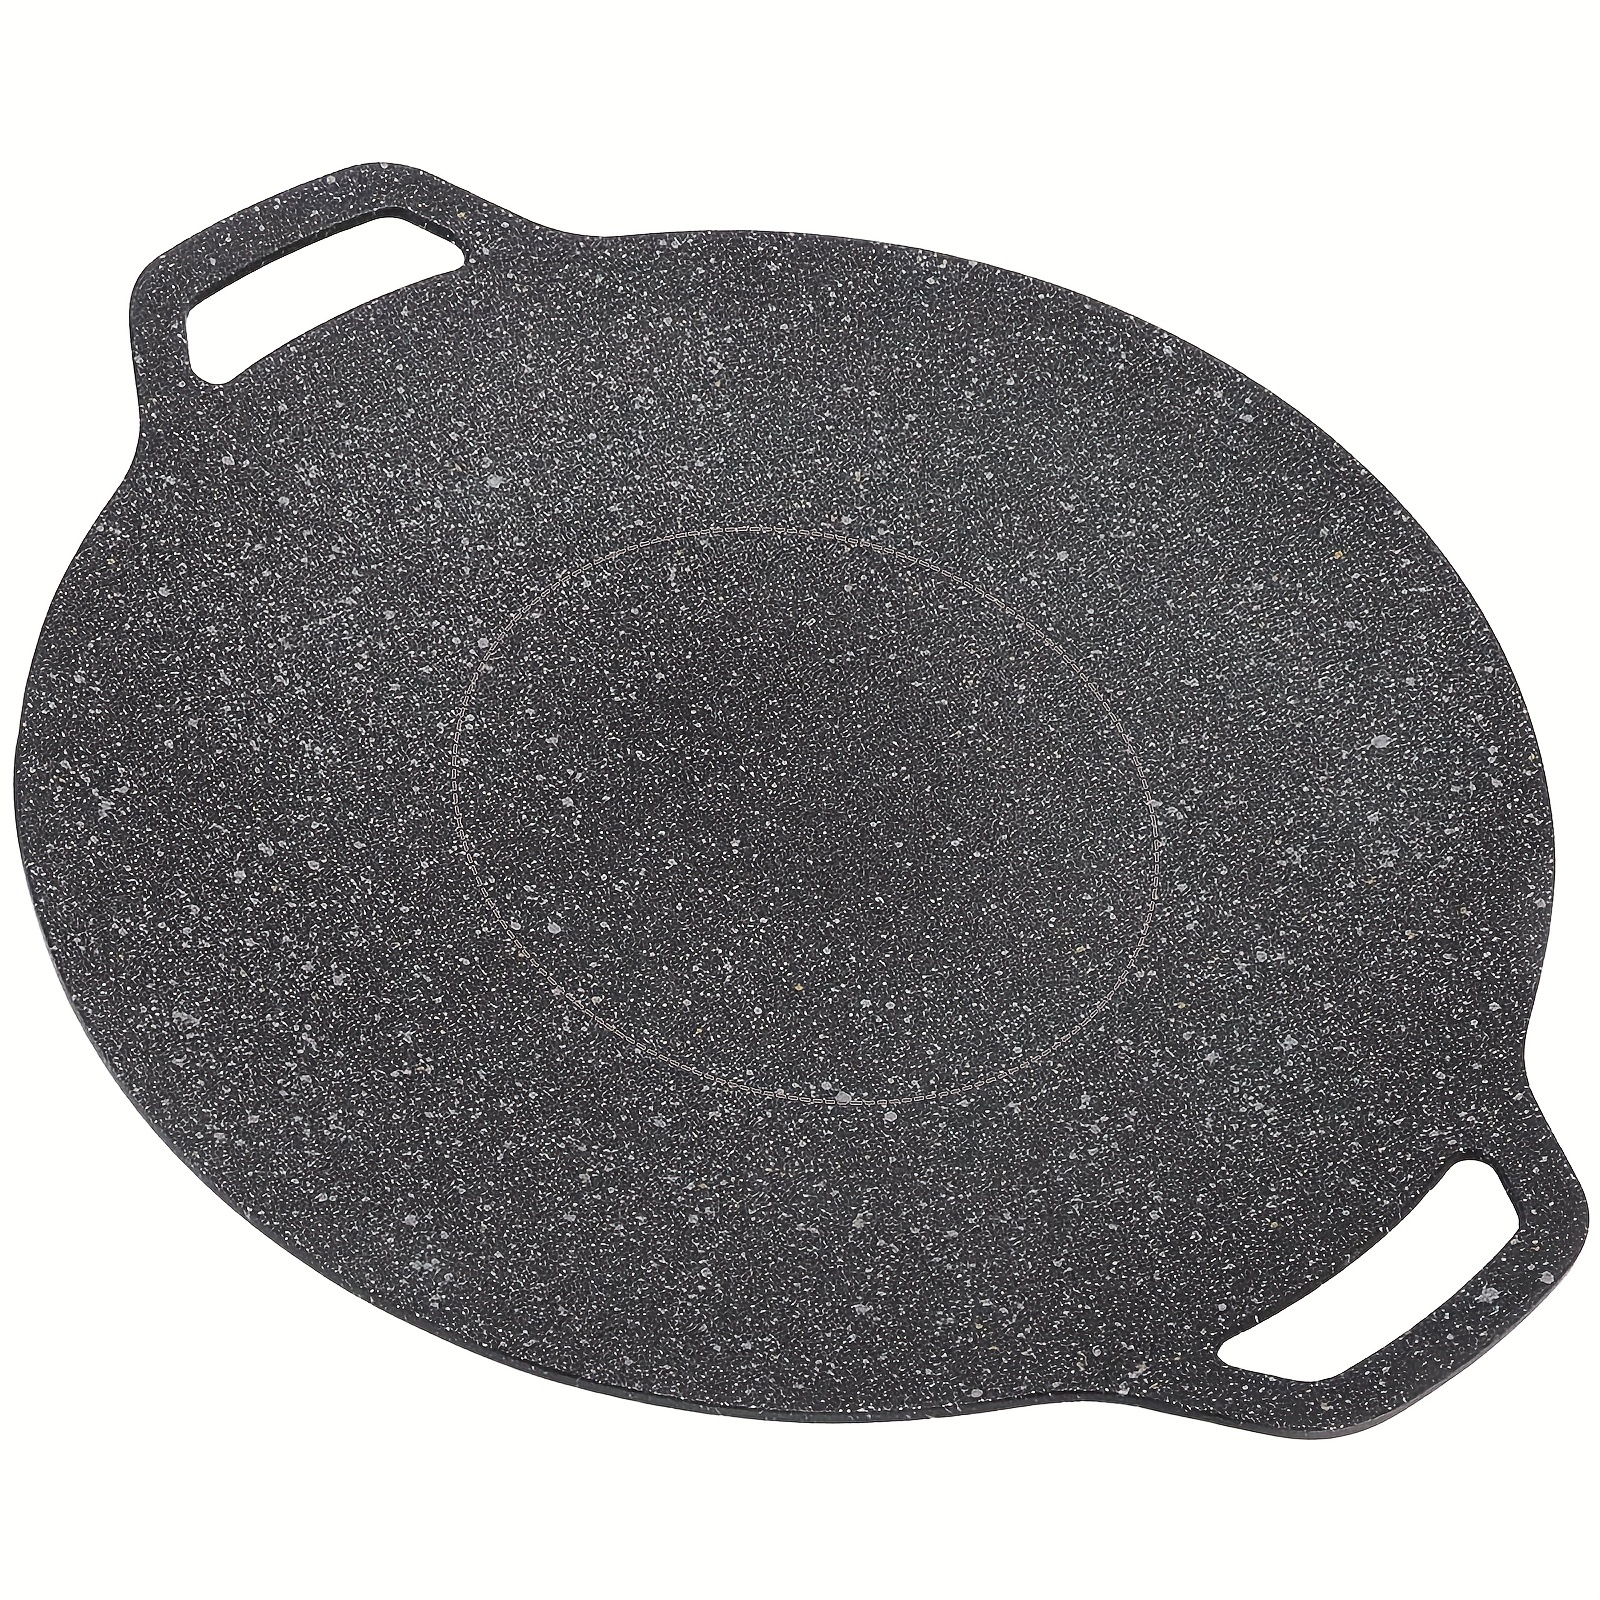 Aluminum Non-Stick Dosa Pan Nonstick Dosa Tava Griddle Dosa Pan Round Griddle Crepe Pancake Easy to Cook Indian Style Cookware with Handle Pizza